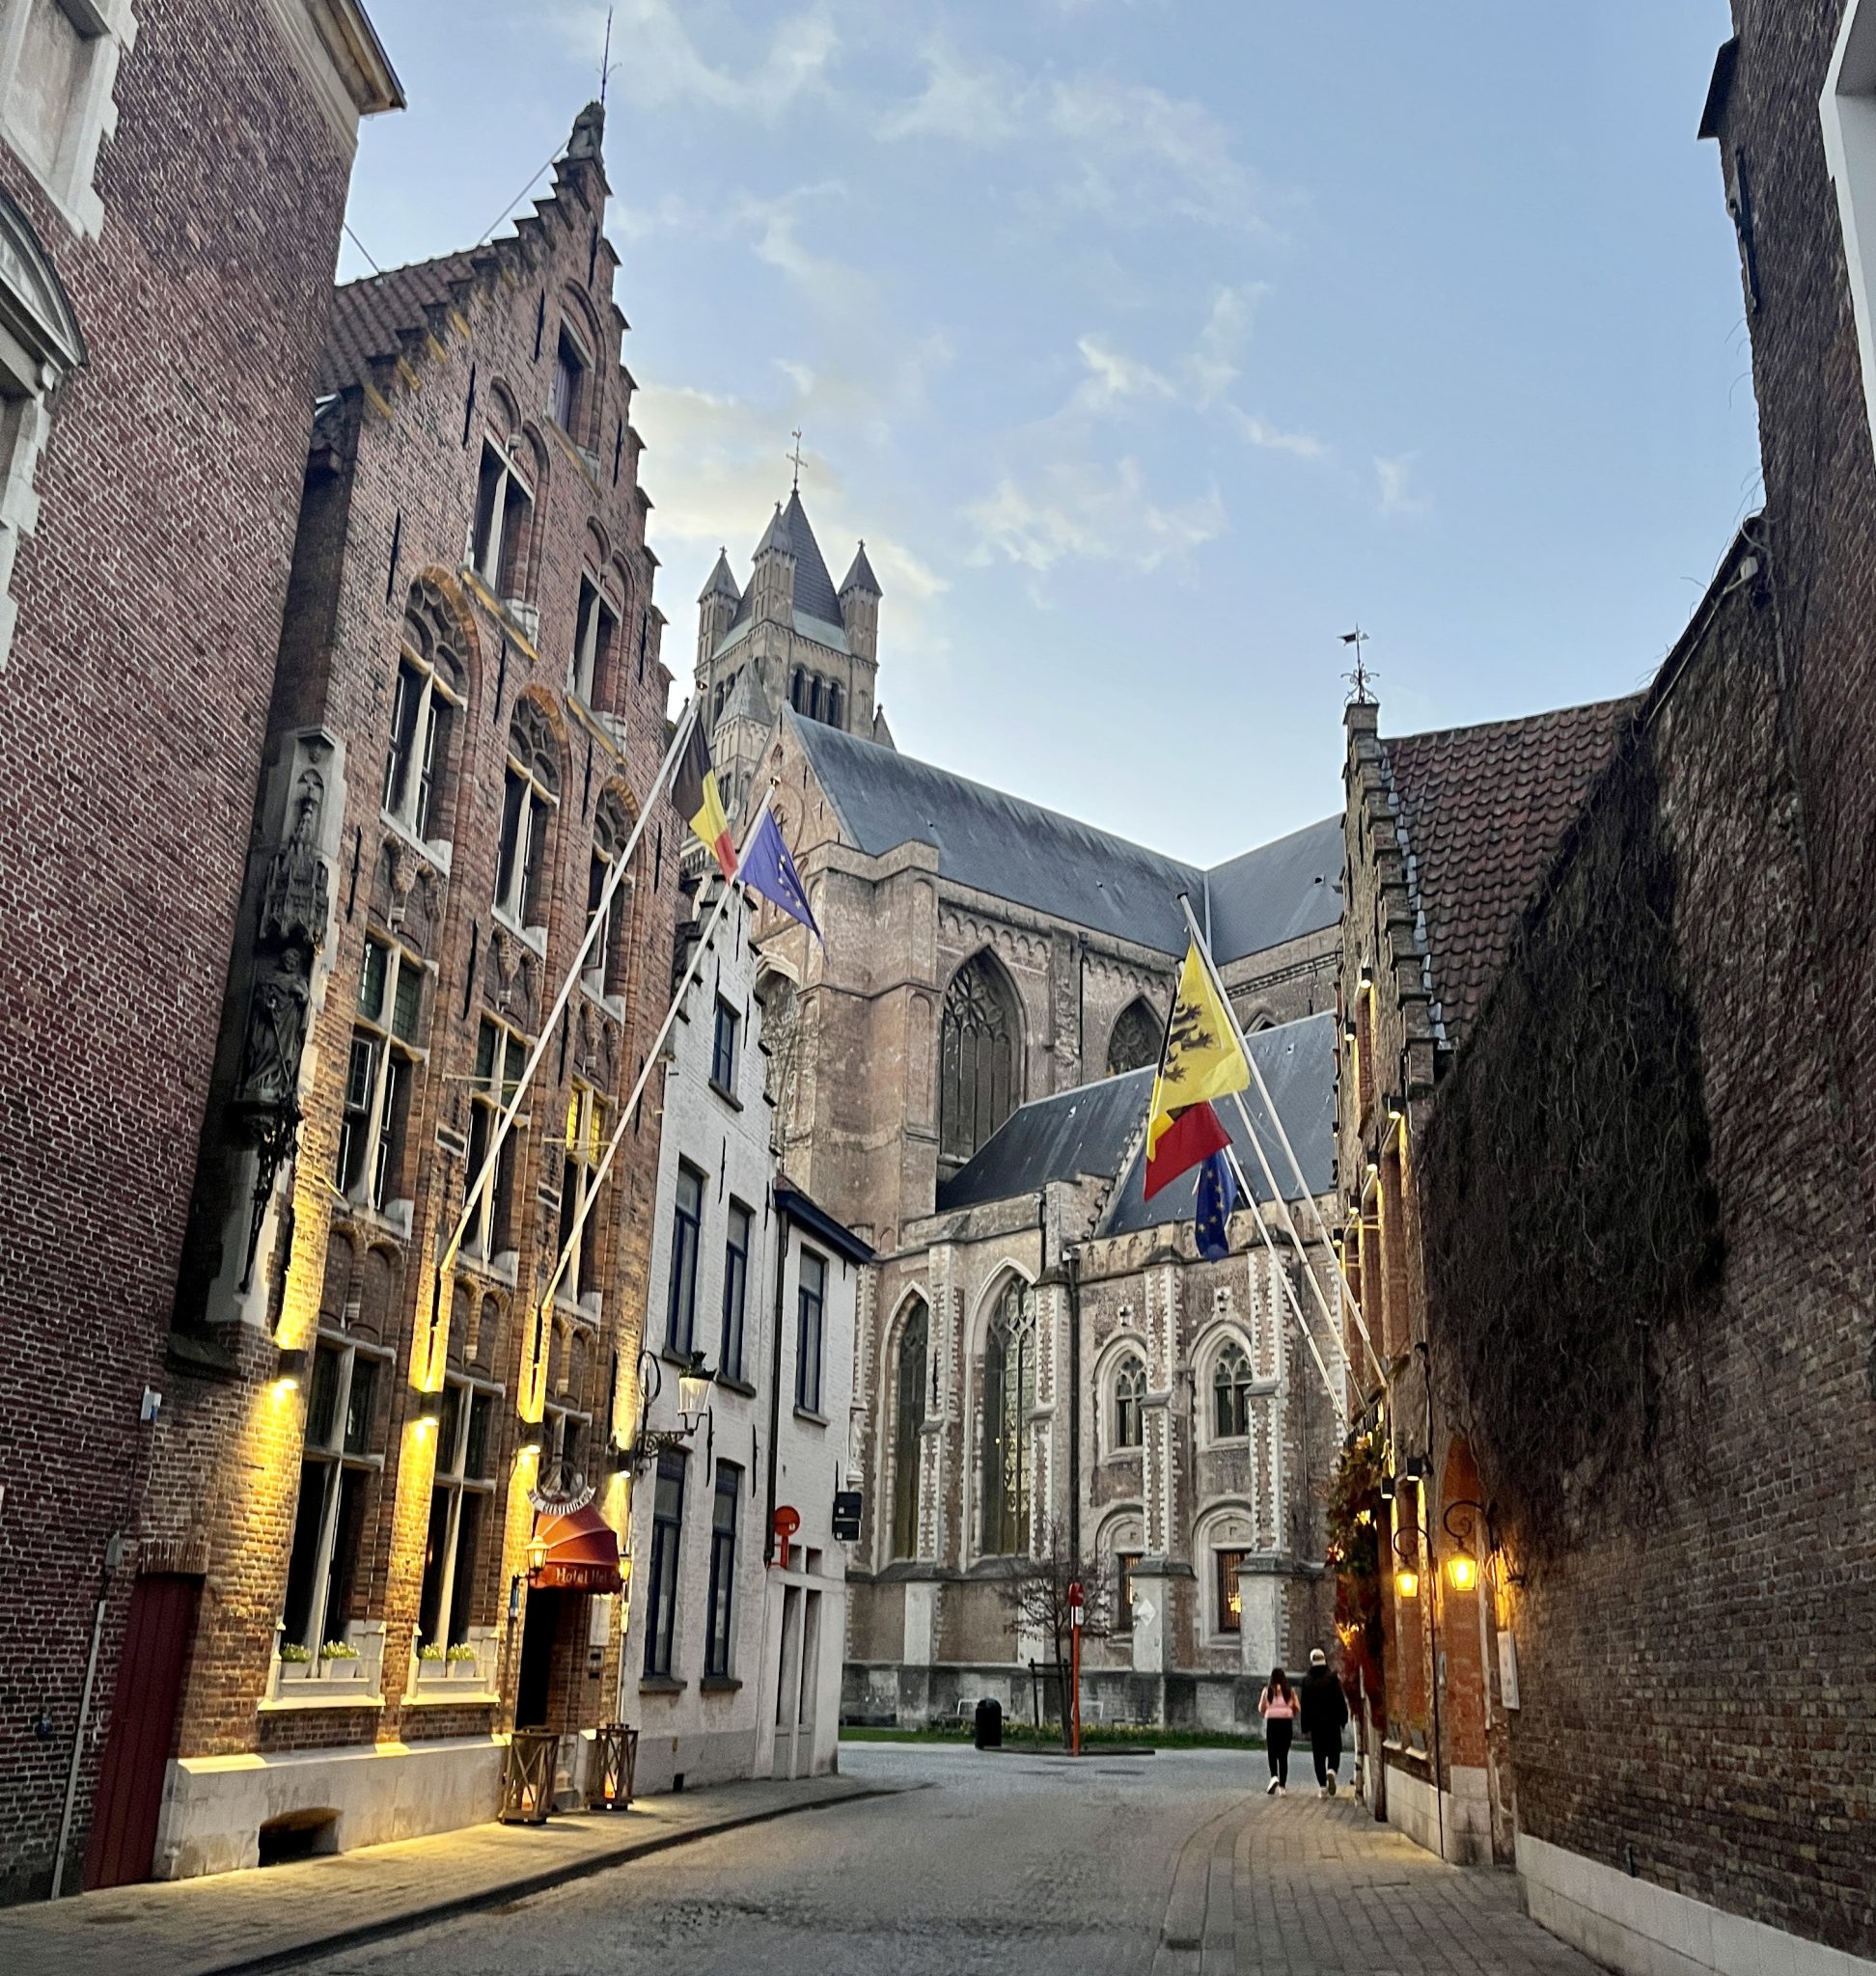 Enjoy the Historic Architecture at NH Brugge